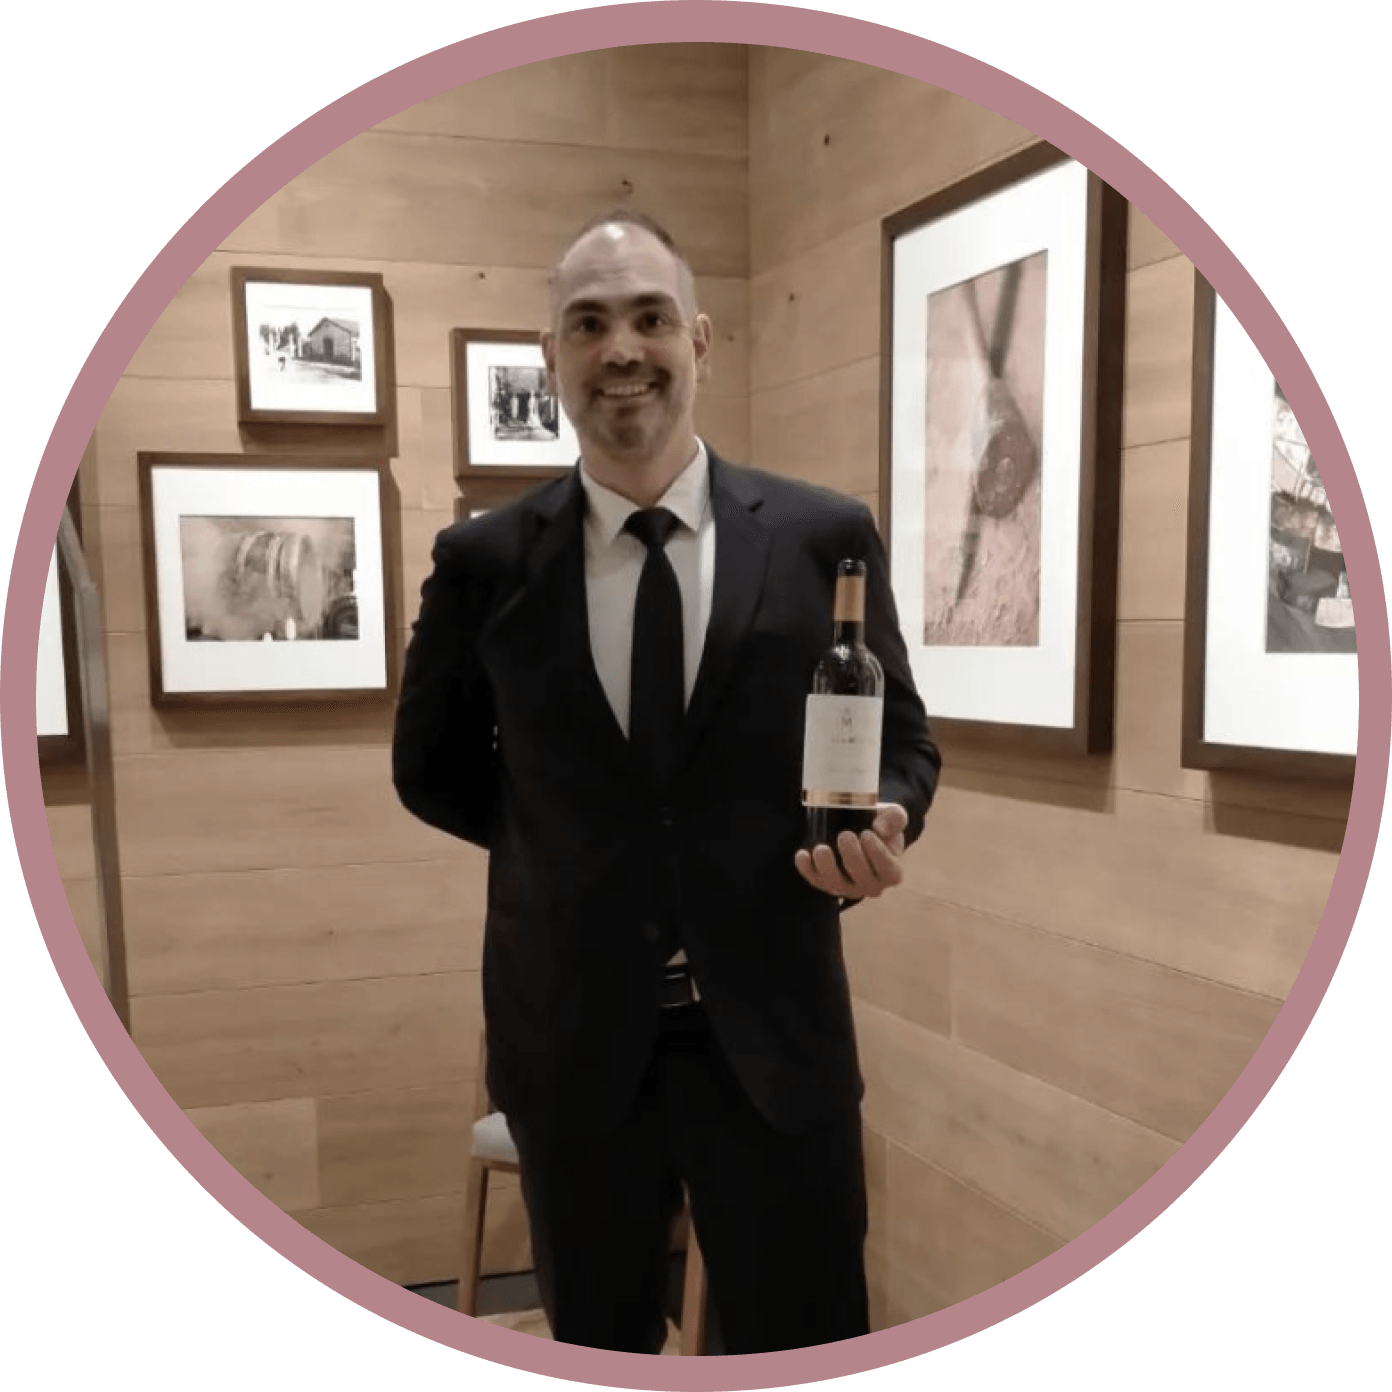 Uruguayan sommelier Frederico Moura smiling while holding a glass of wine.